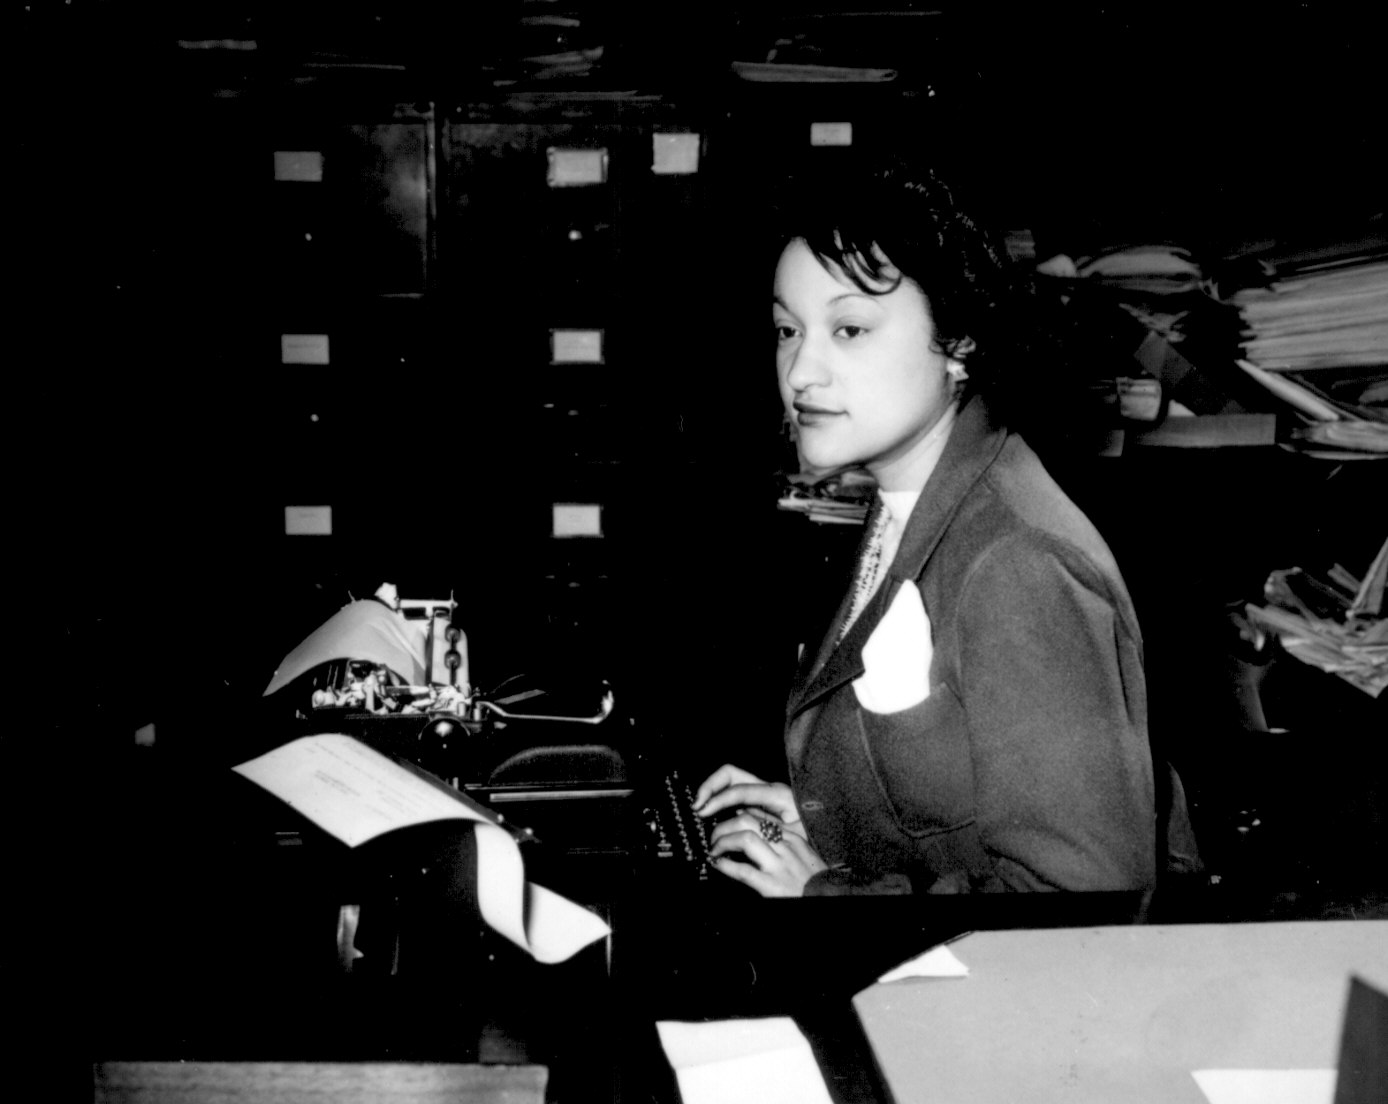 African-American office worker Clara Camille Carroll at a government office in Washington DC, United States, 15 Jan 1943